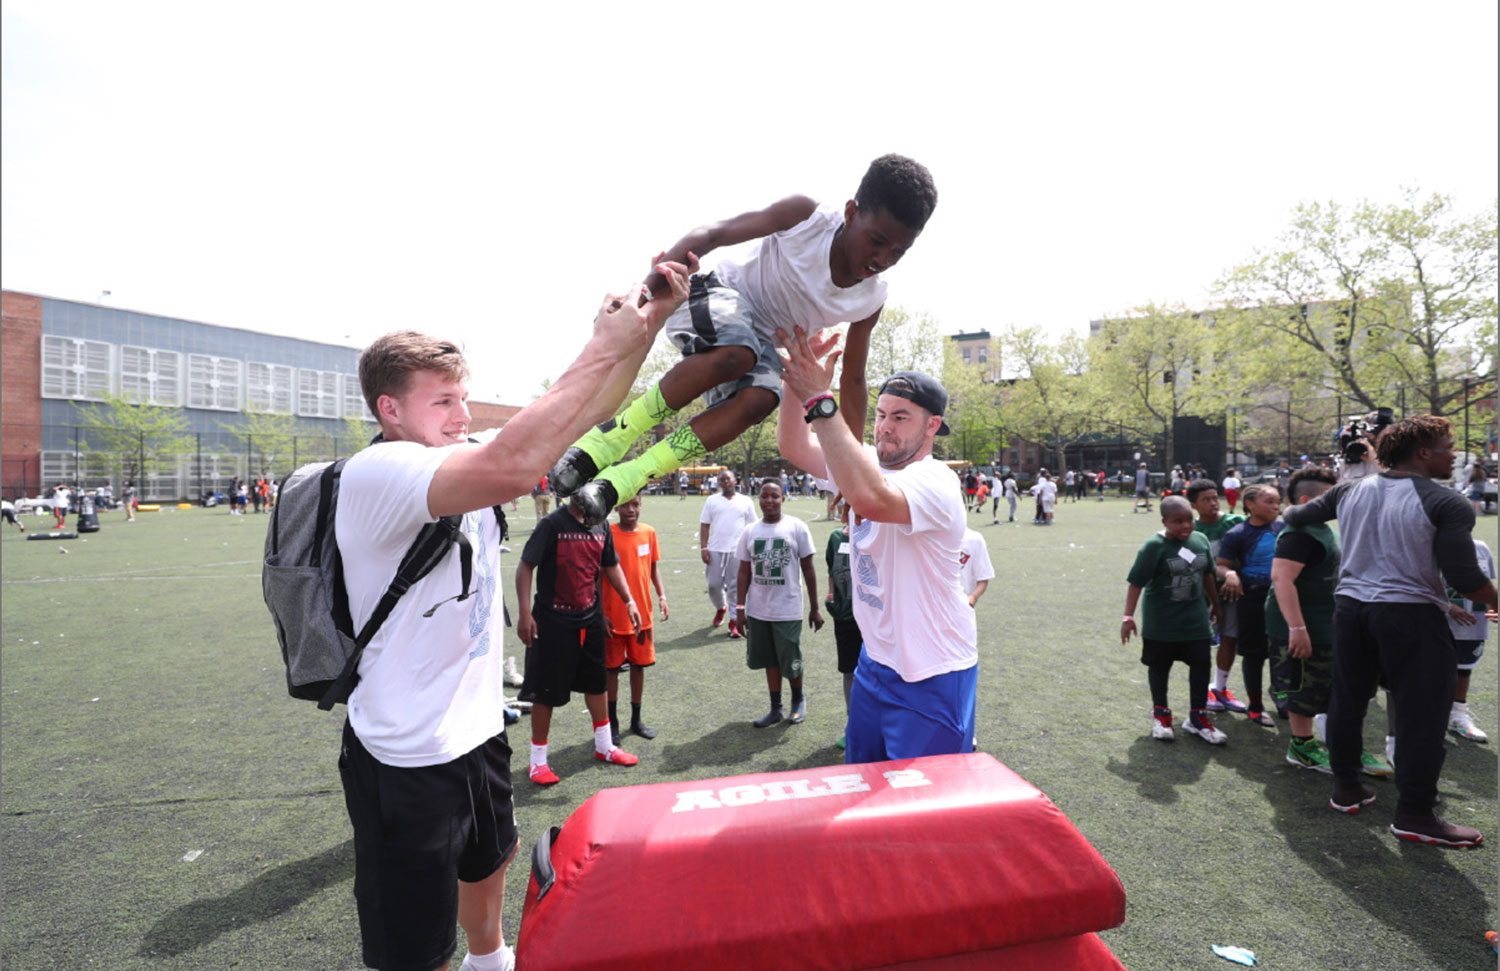 A participant leaps over an obstacle with the help of two BYU players.